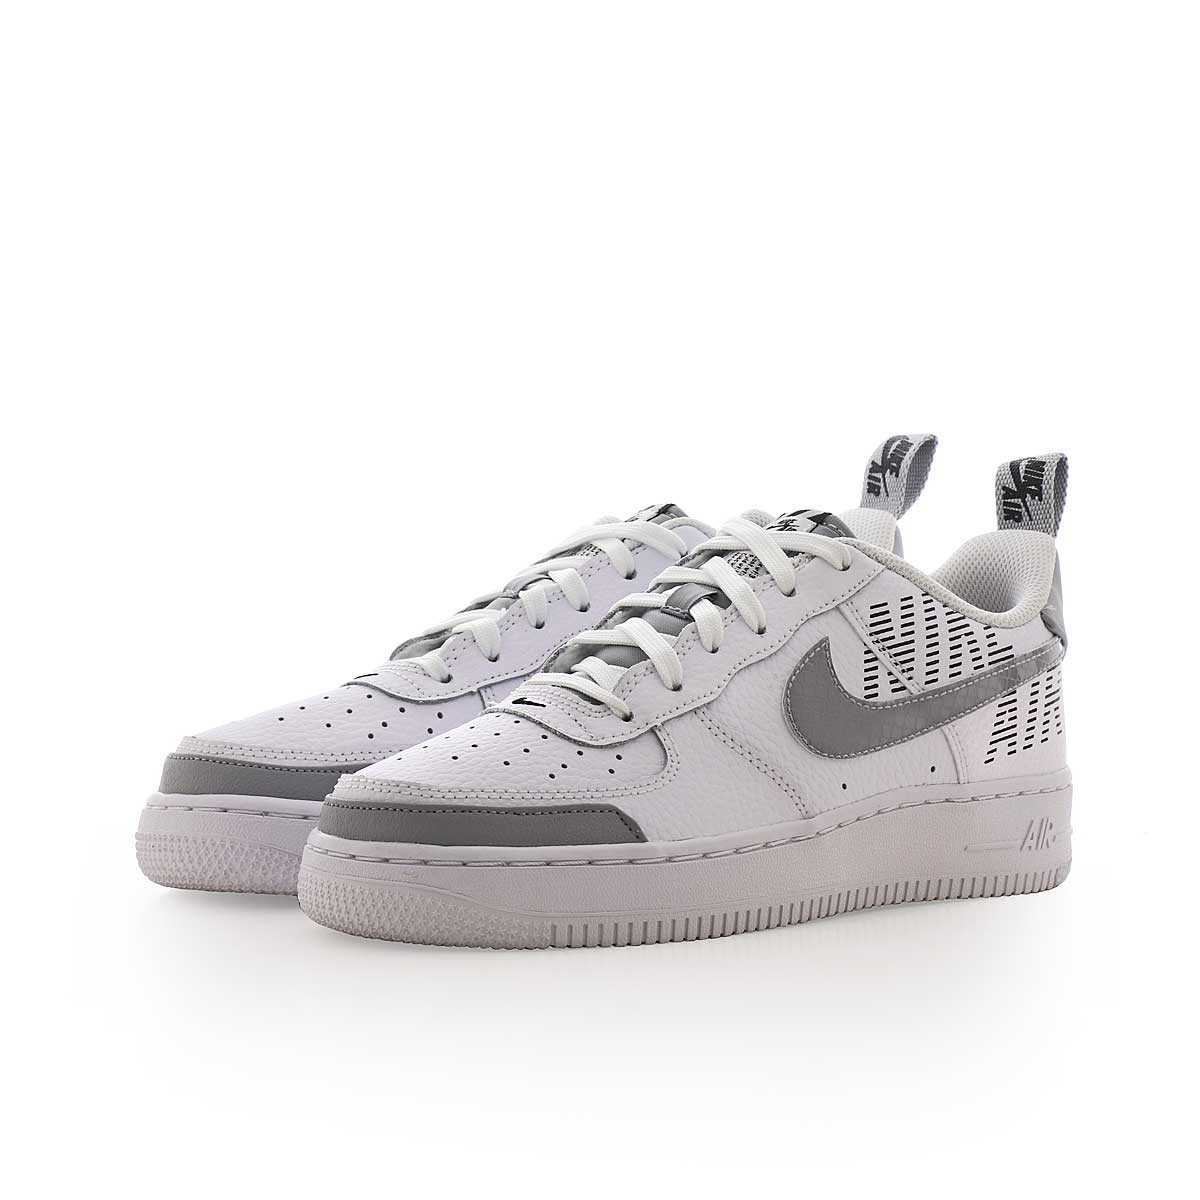 Buy AIR FORCE 1 LV8 2 (GS) - N/A 0.0 on !